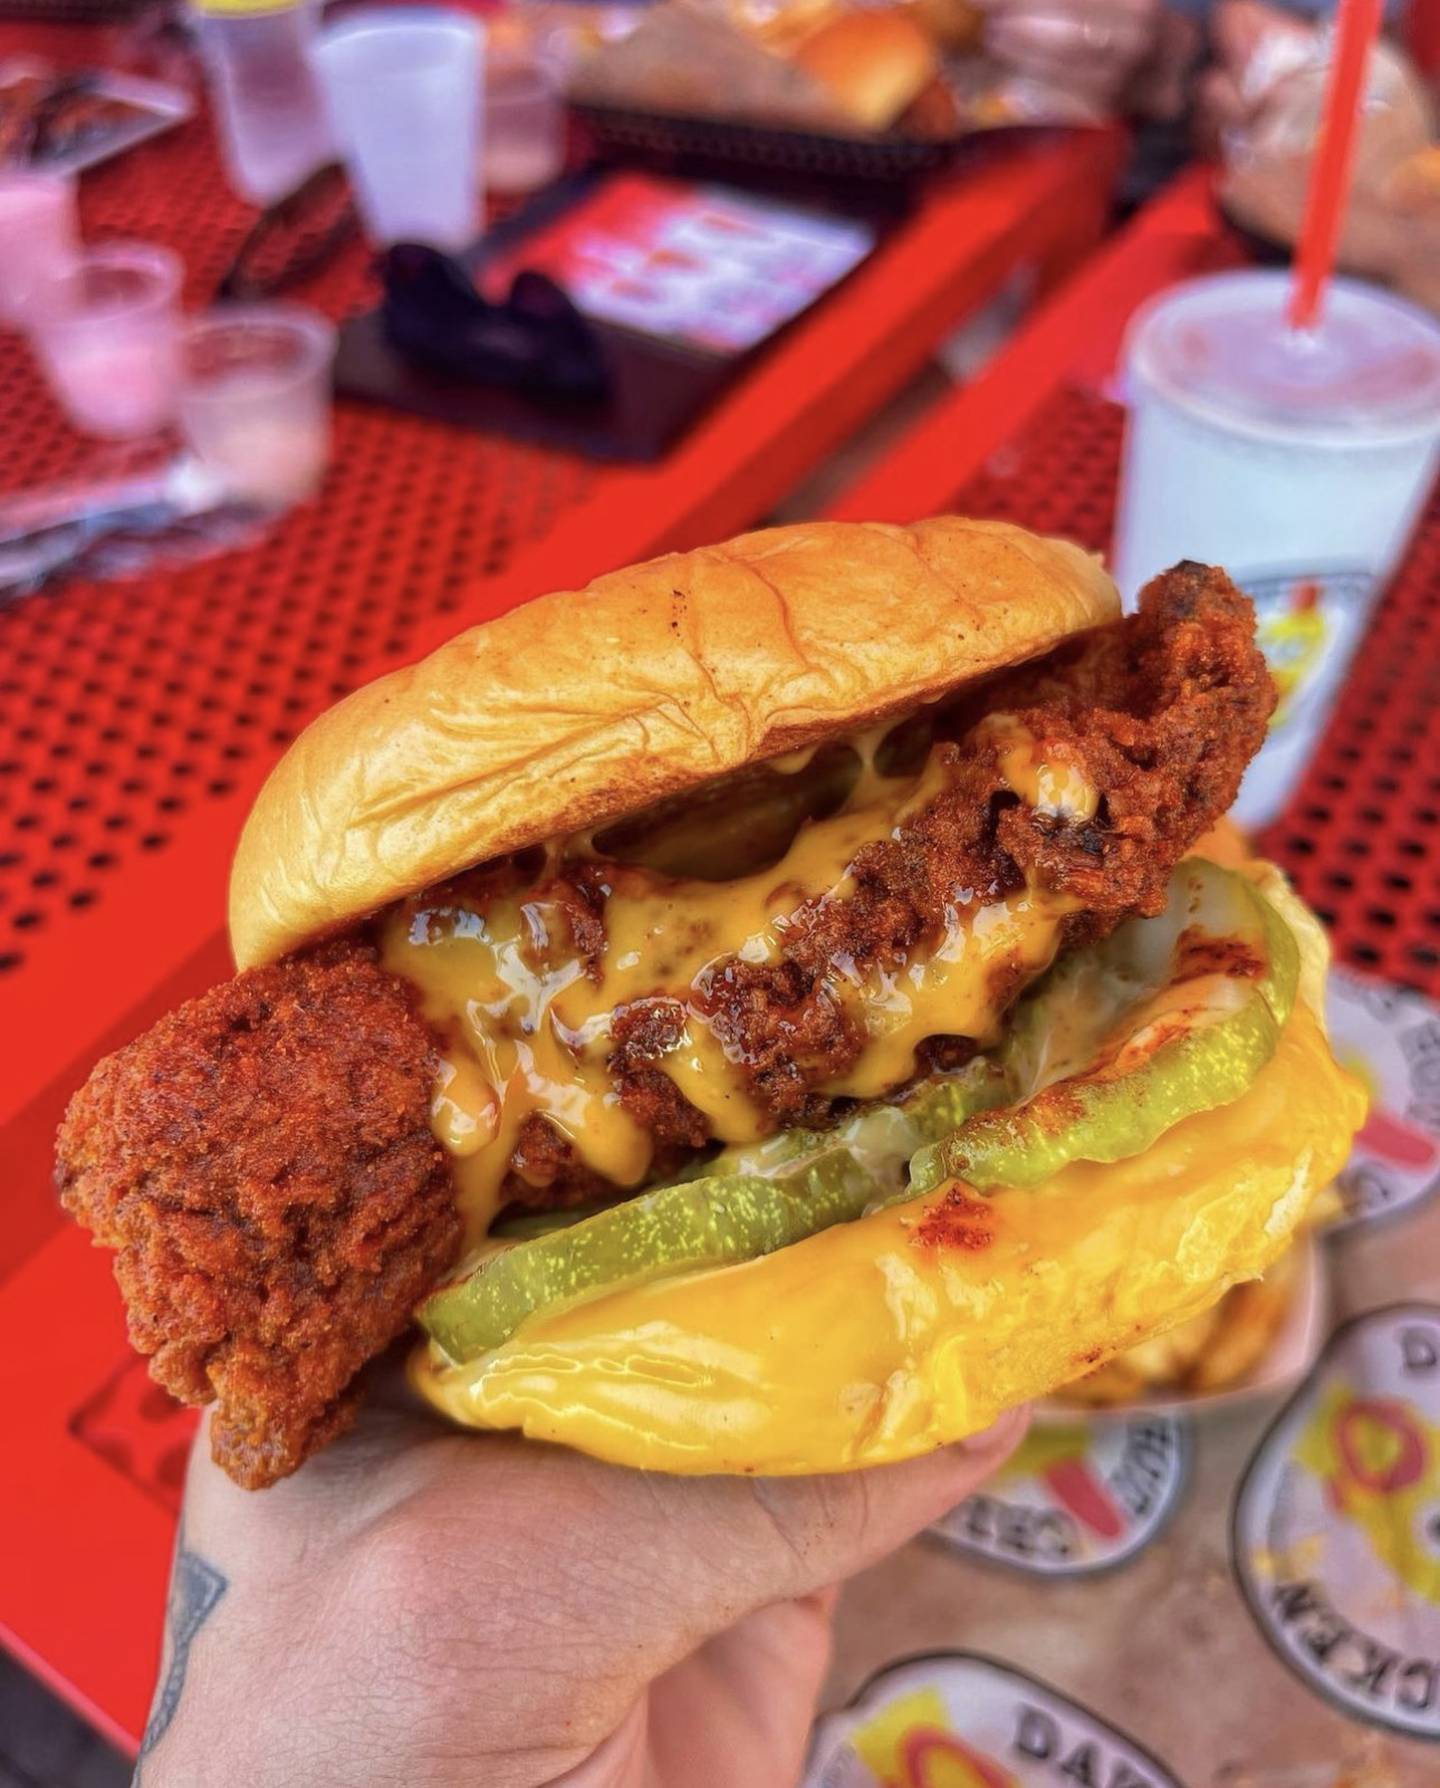 A slider from Dave's Hot Chicken. The company opens Friday in Owings Mills, with two additional branches coming to the greater Baltimore region soon.